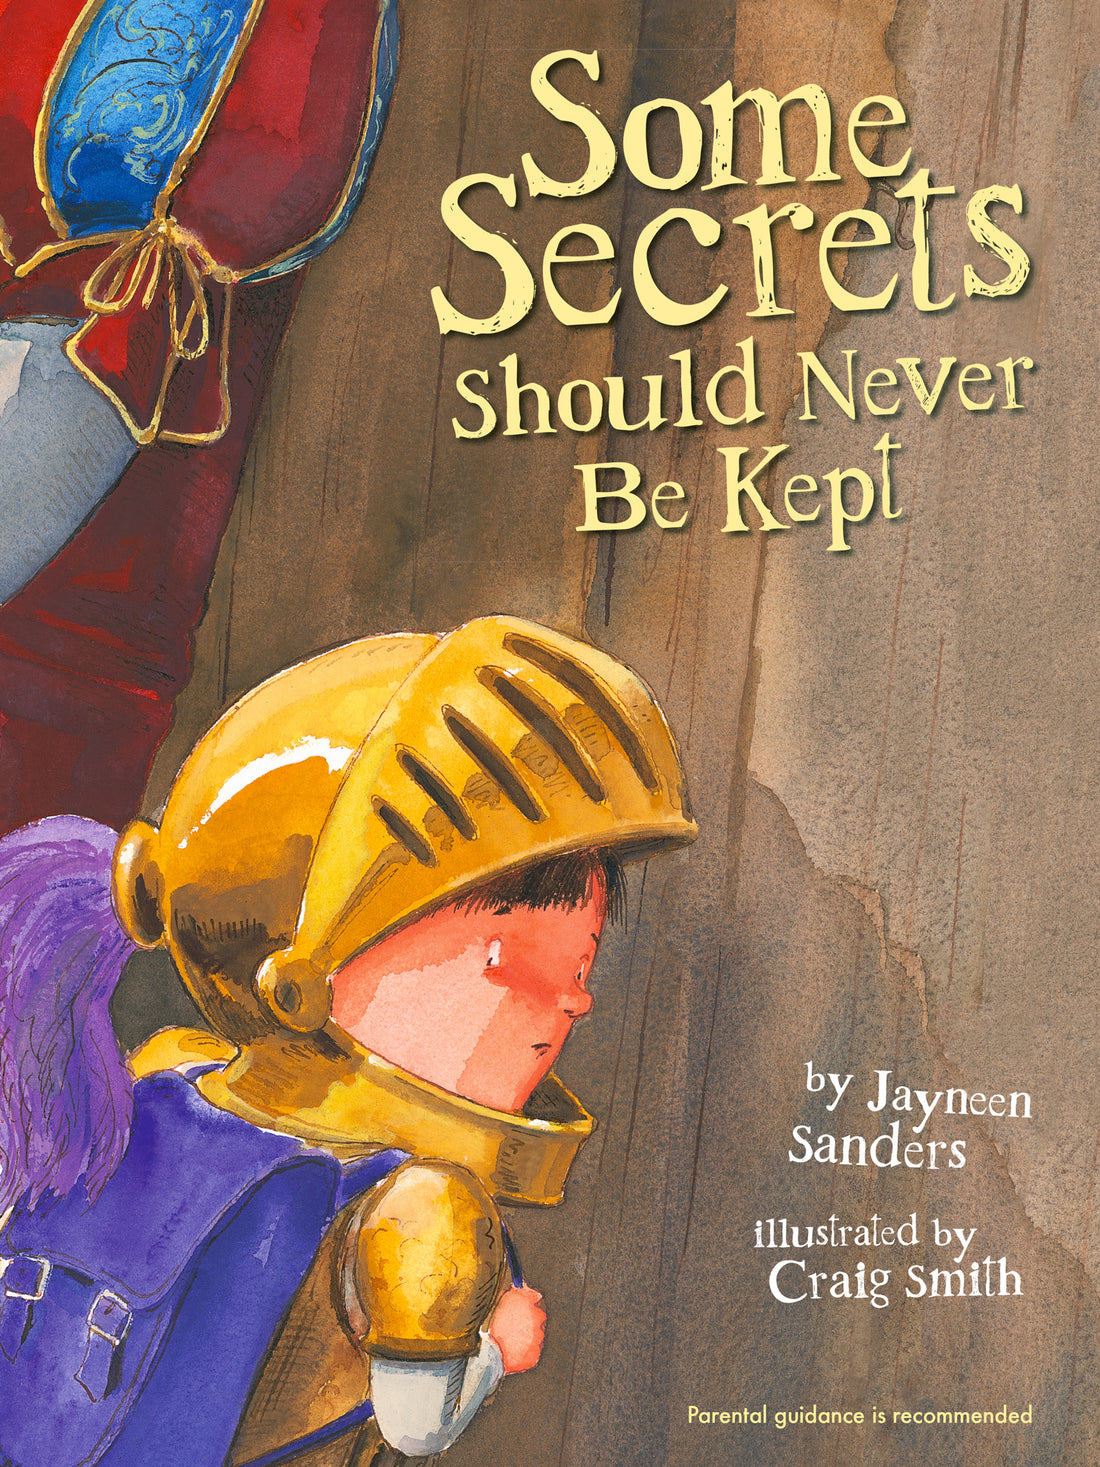 Why I Wrote Some Secrets Should Never Be Kept